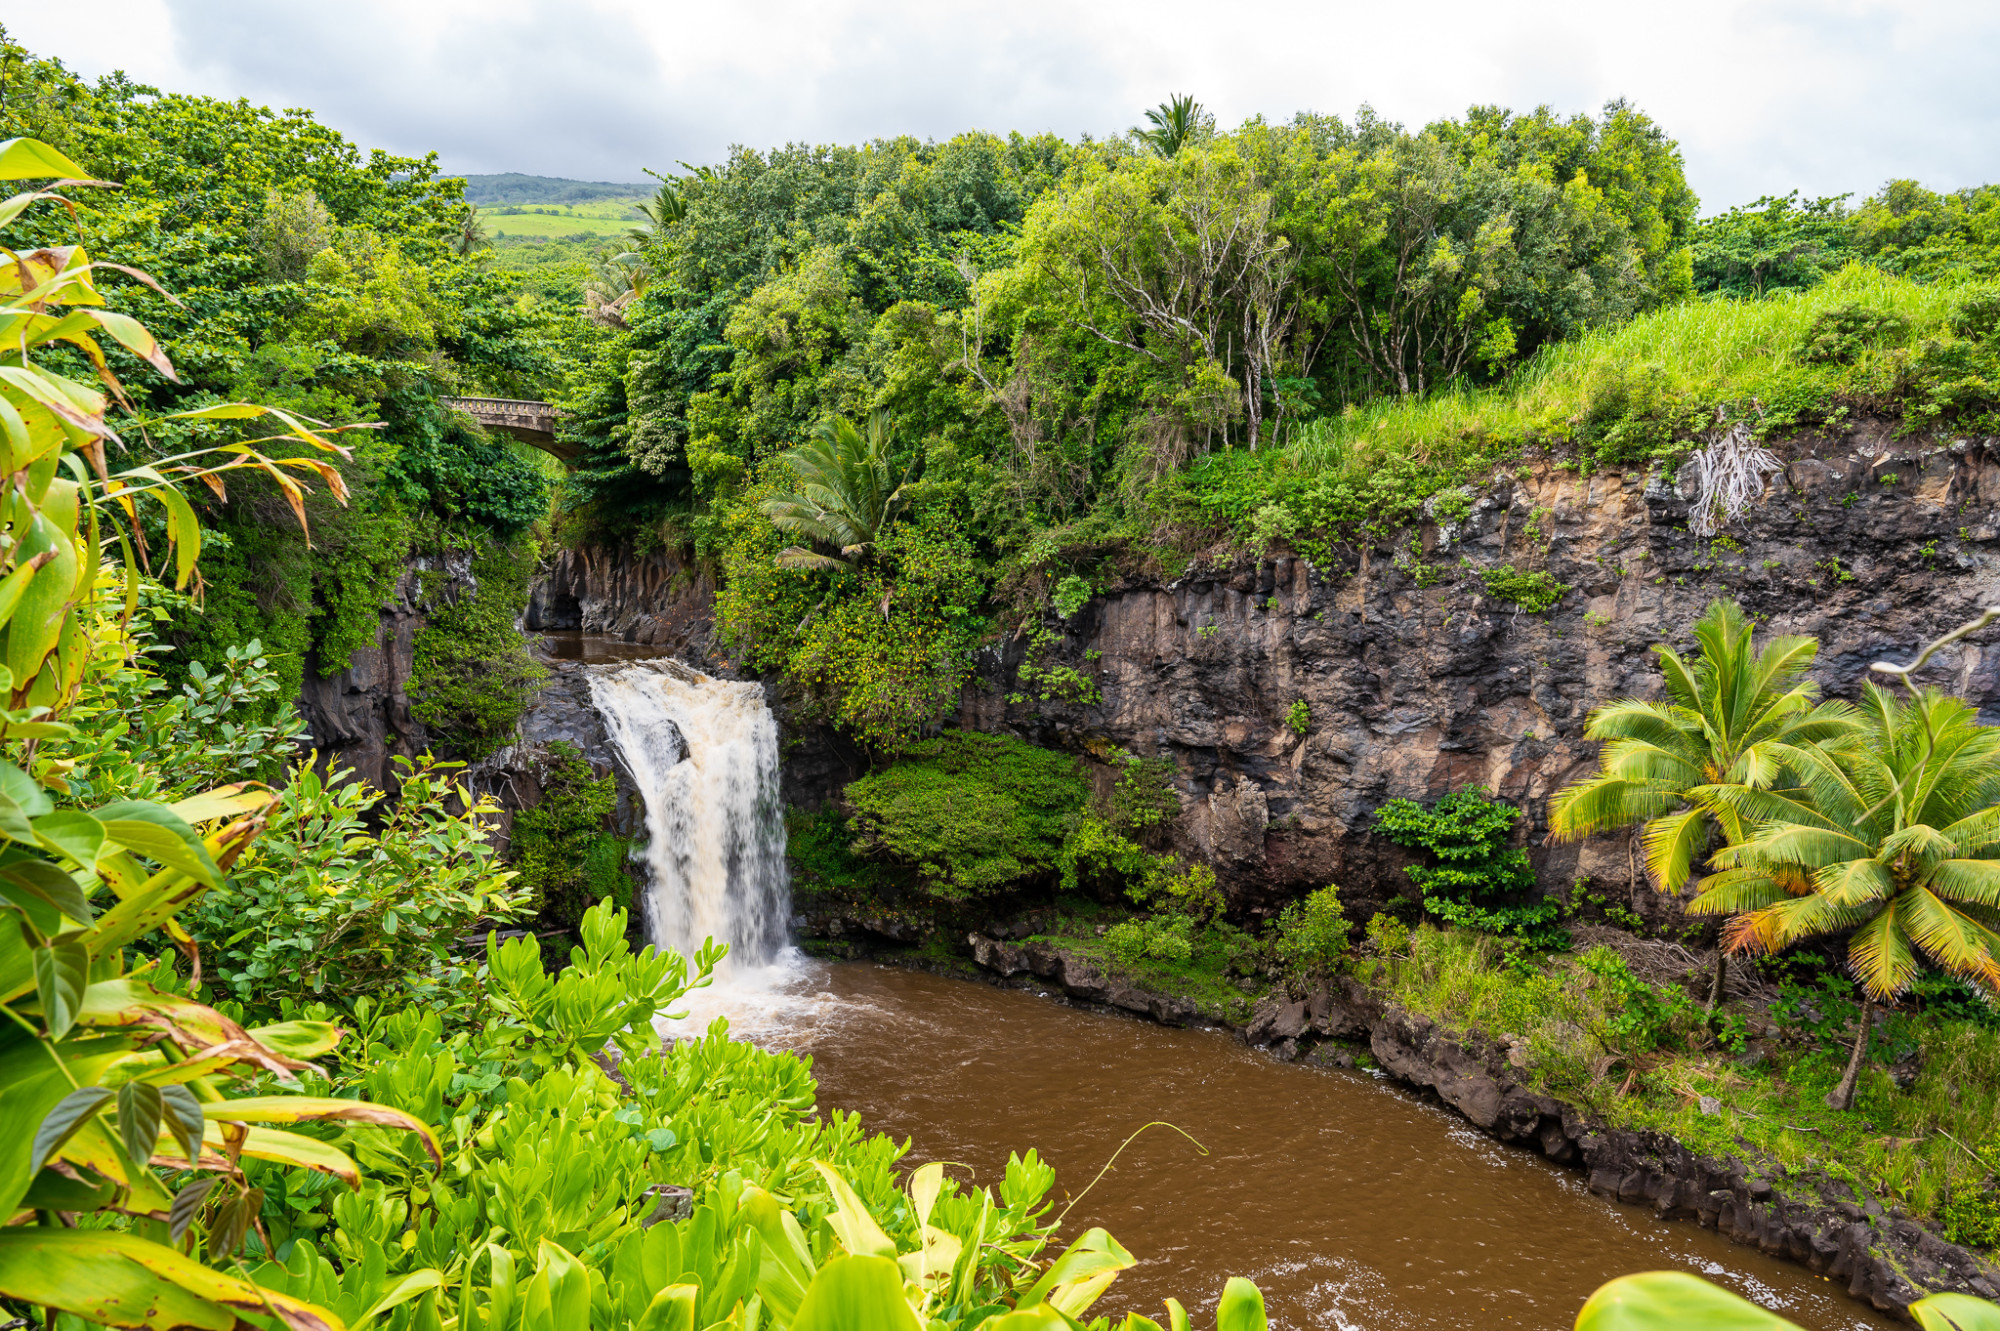 'Ohe'o Gulch and its Seven Sacred Pools